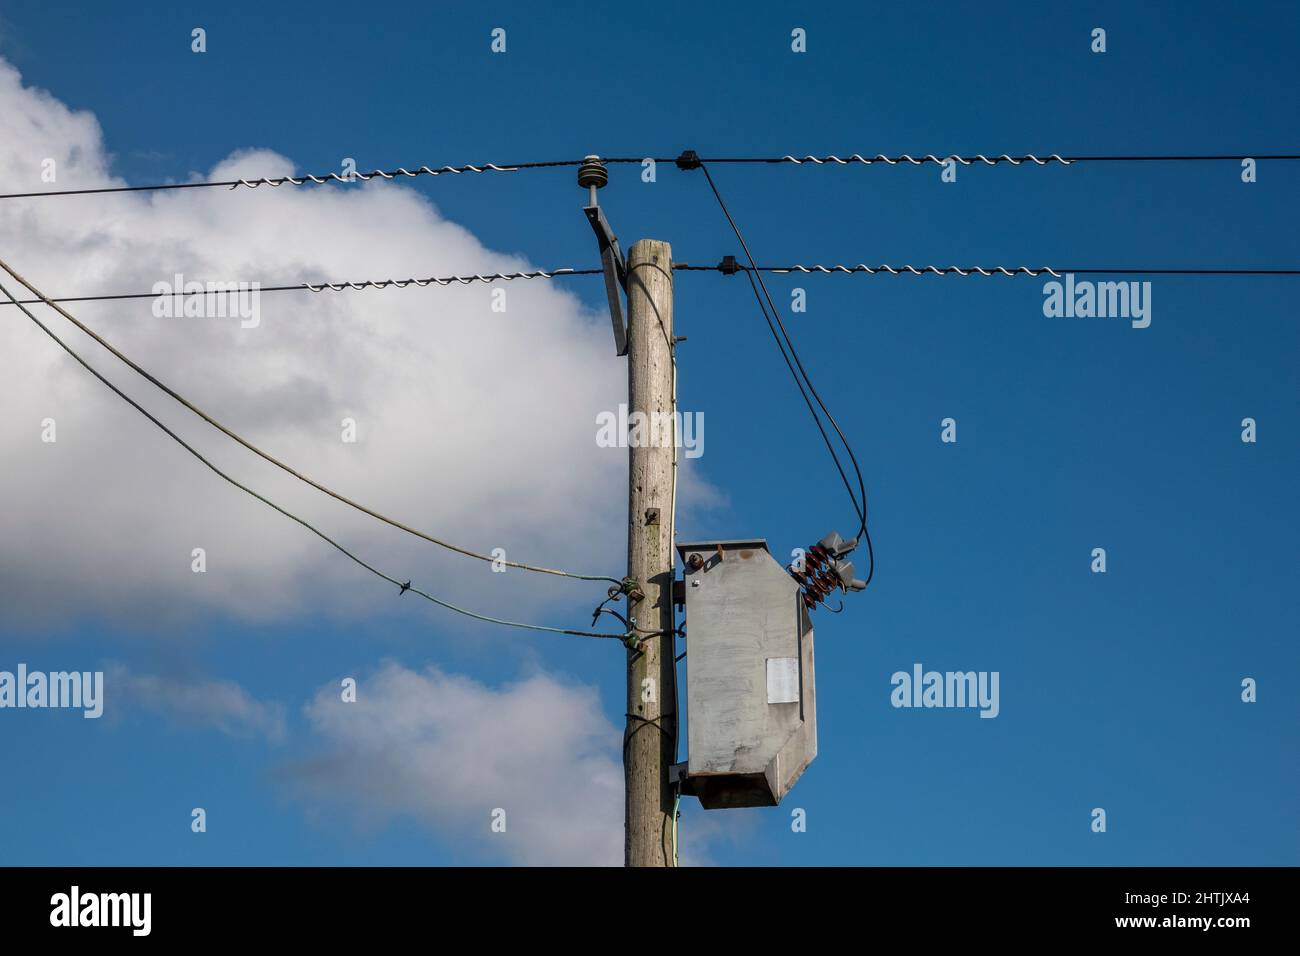 Simple transformer connection on a wooden pylon electricity pole carrying two cables, blue sky and fluffy white cloud behind Stock Photo